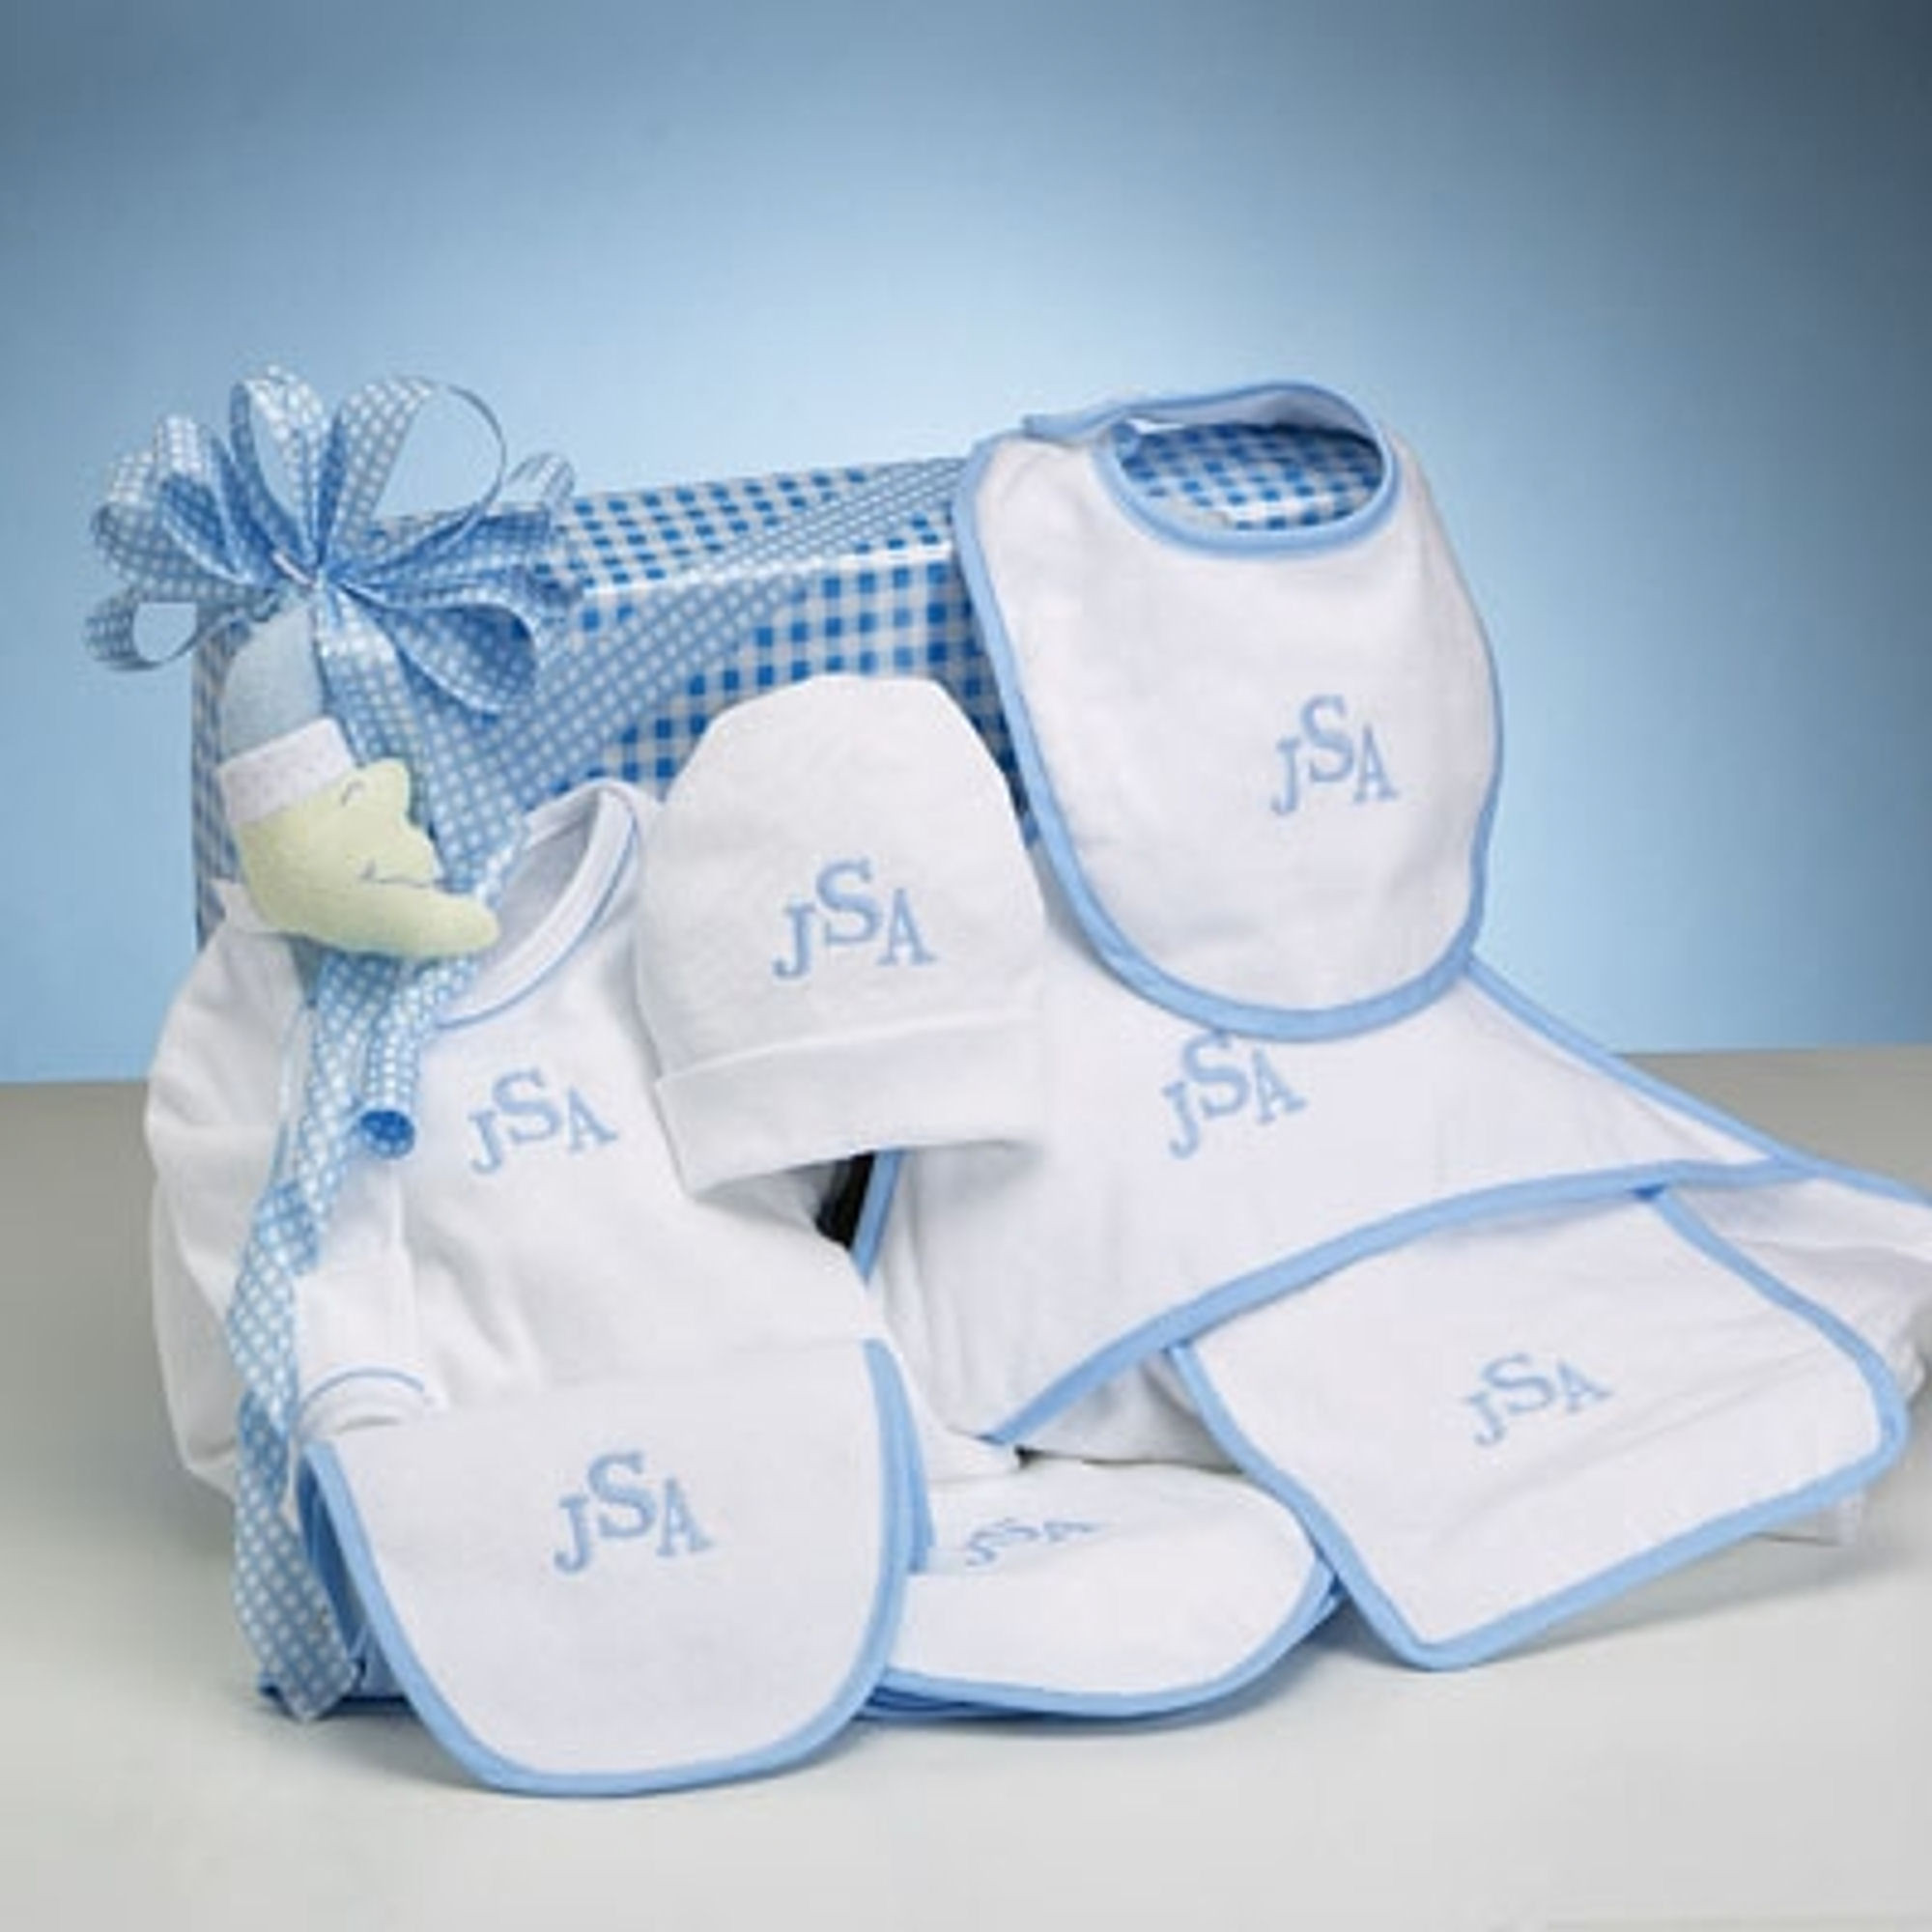 Personalized Baby Gifts For Boys
 Layette Baby Boy